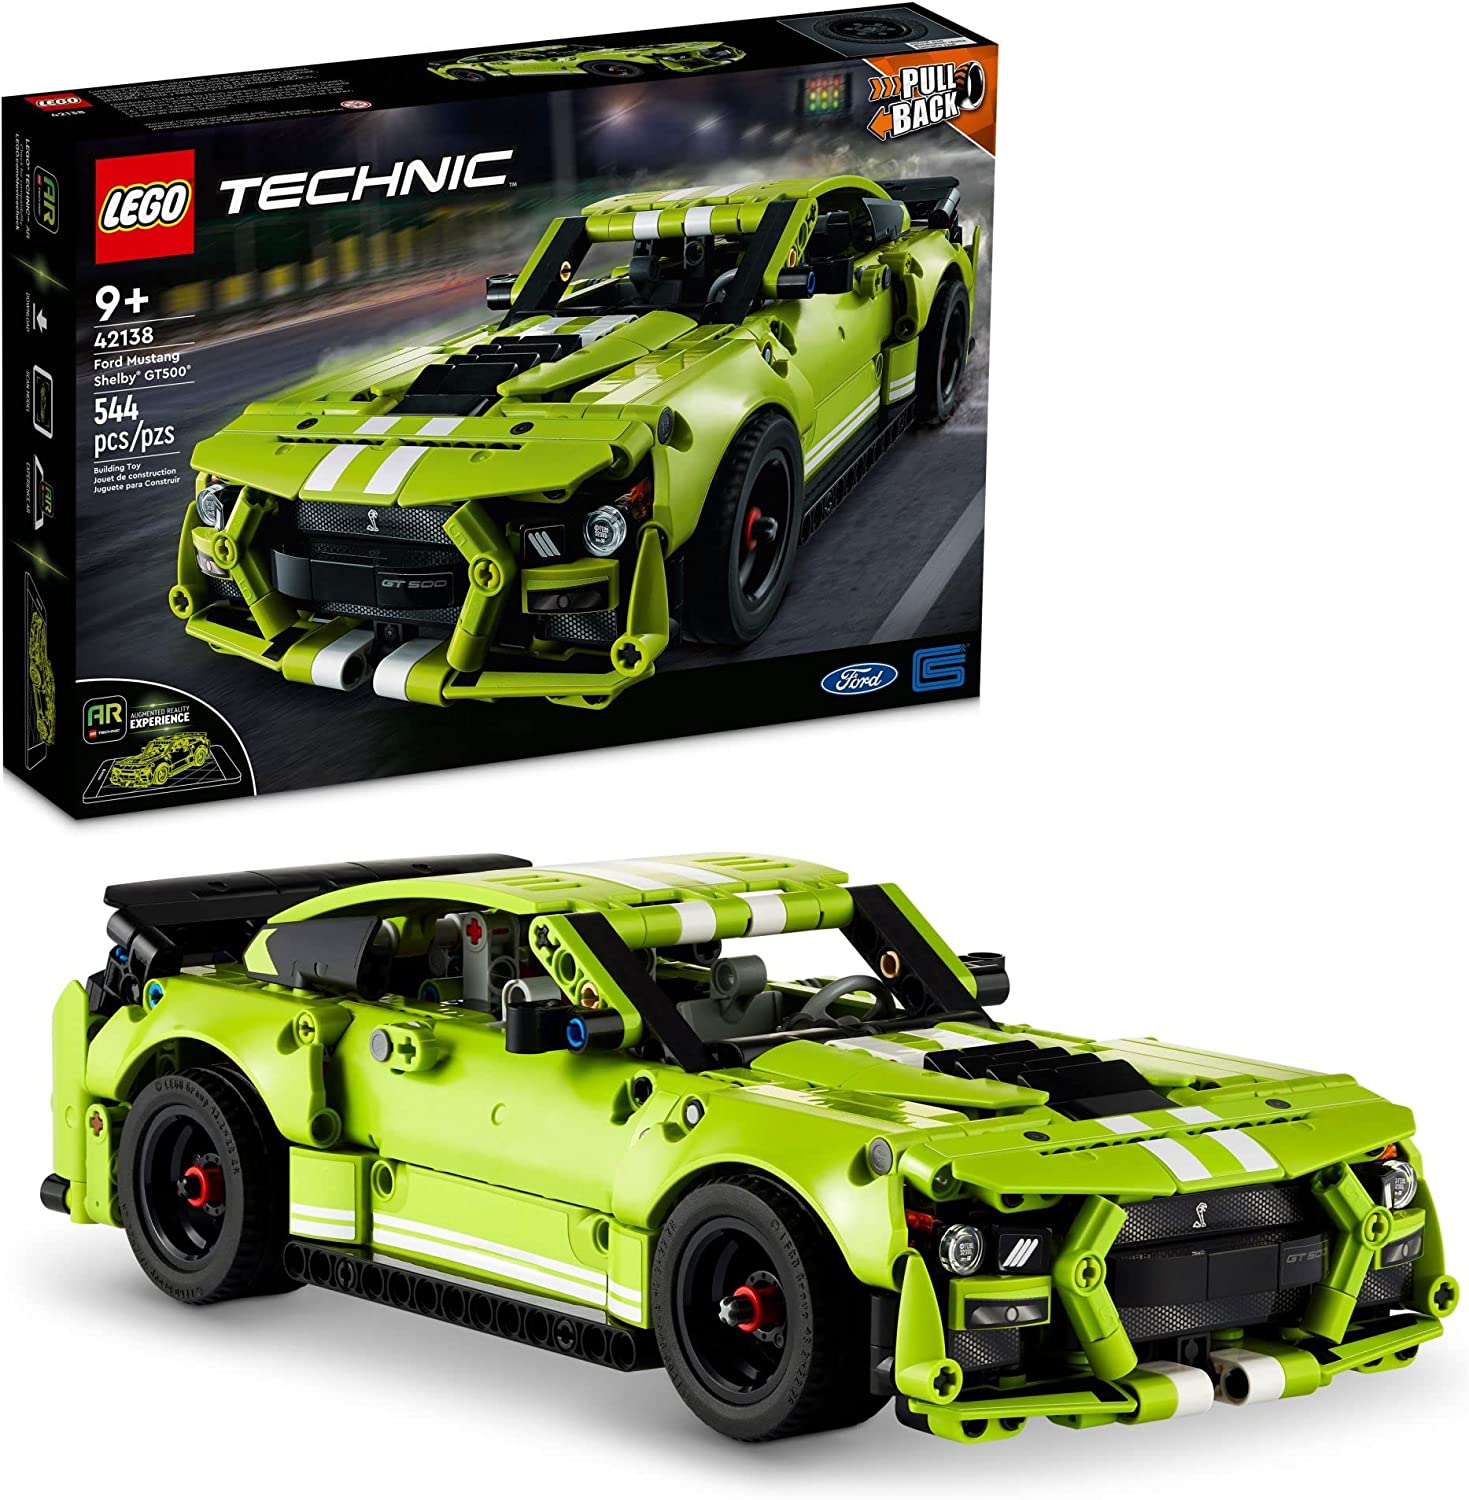 LEGO Technic Ford Mustang Shelby GT500 42138 (544 pcs)